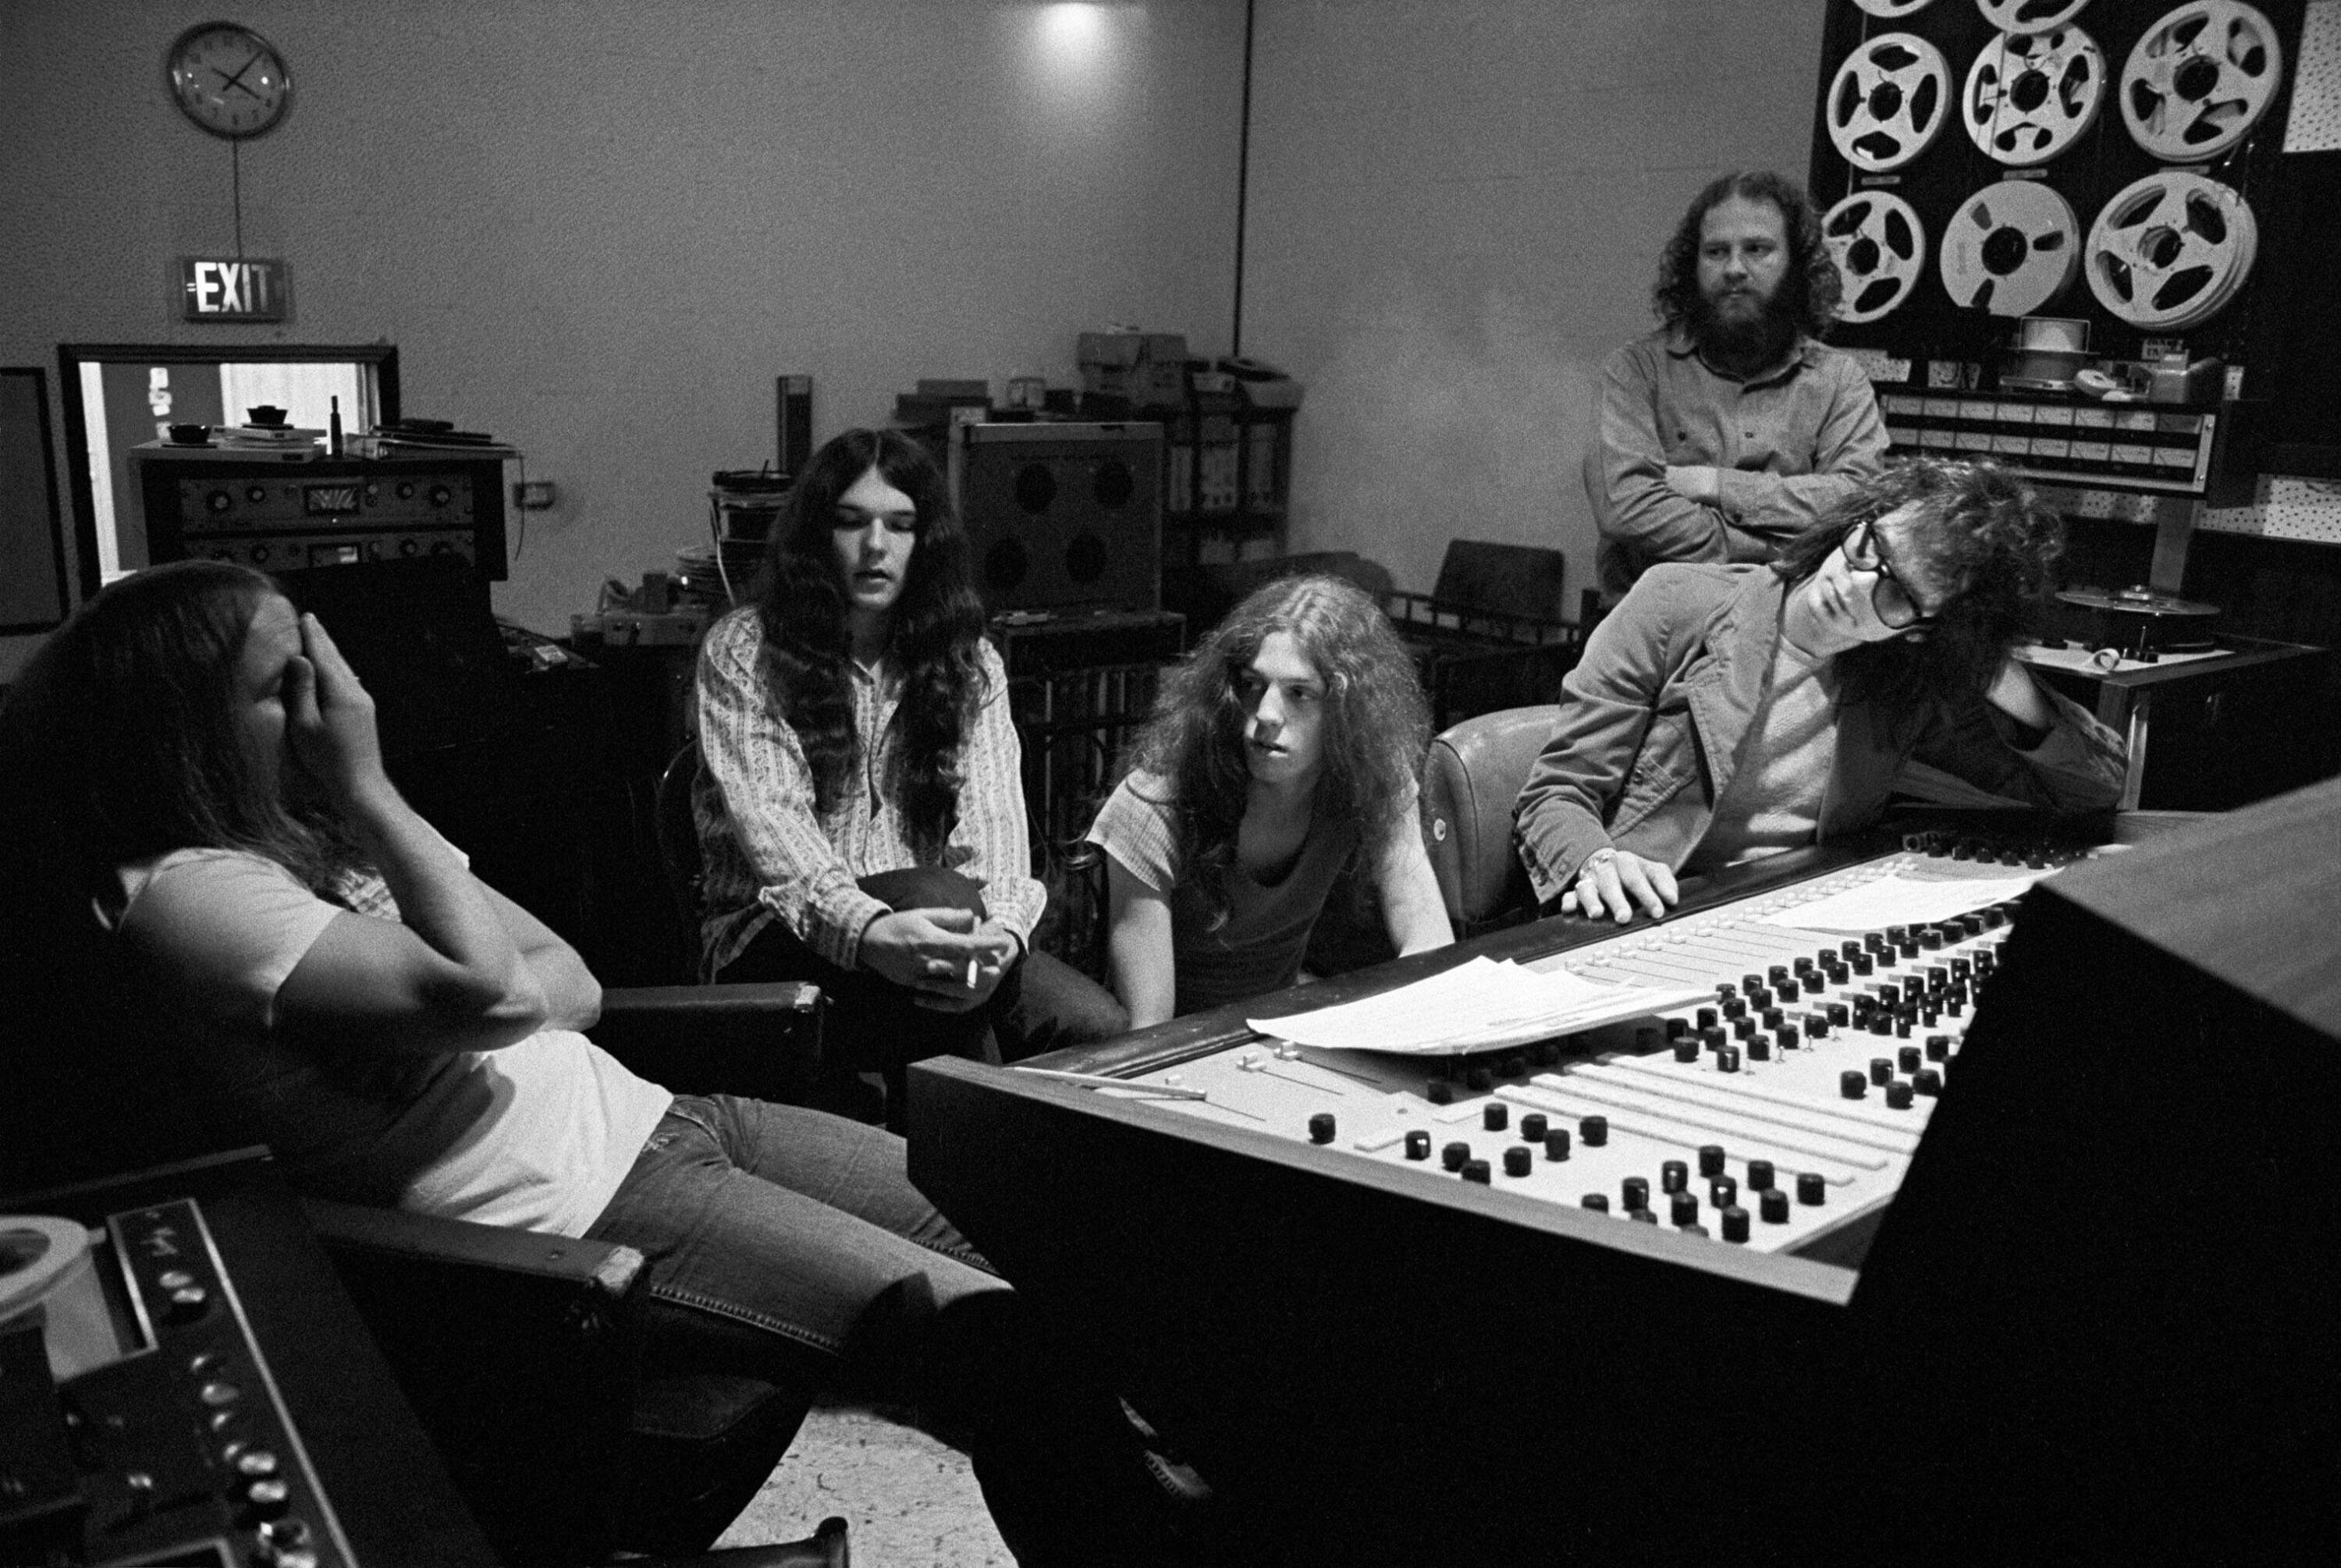 Lynyrd Skynyrd members Ronnie Van Zant, Gary Rossington and Allen Collins work with producer Al Kooper on &quot;Pronounced Lynyrd Skynyrd&quot; with engineer Bob “Tub” Langford looking on in the control room on May 6, 1973 in Doraville-Atlanta, Georgia. (Tom Hill/WireImage via Getty Images)